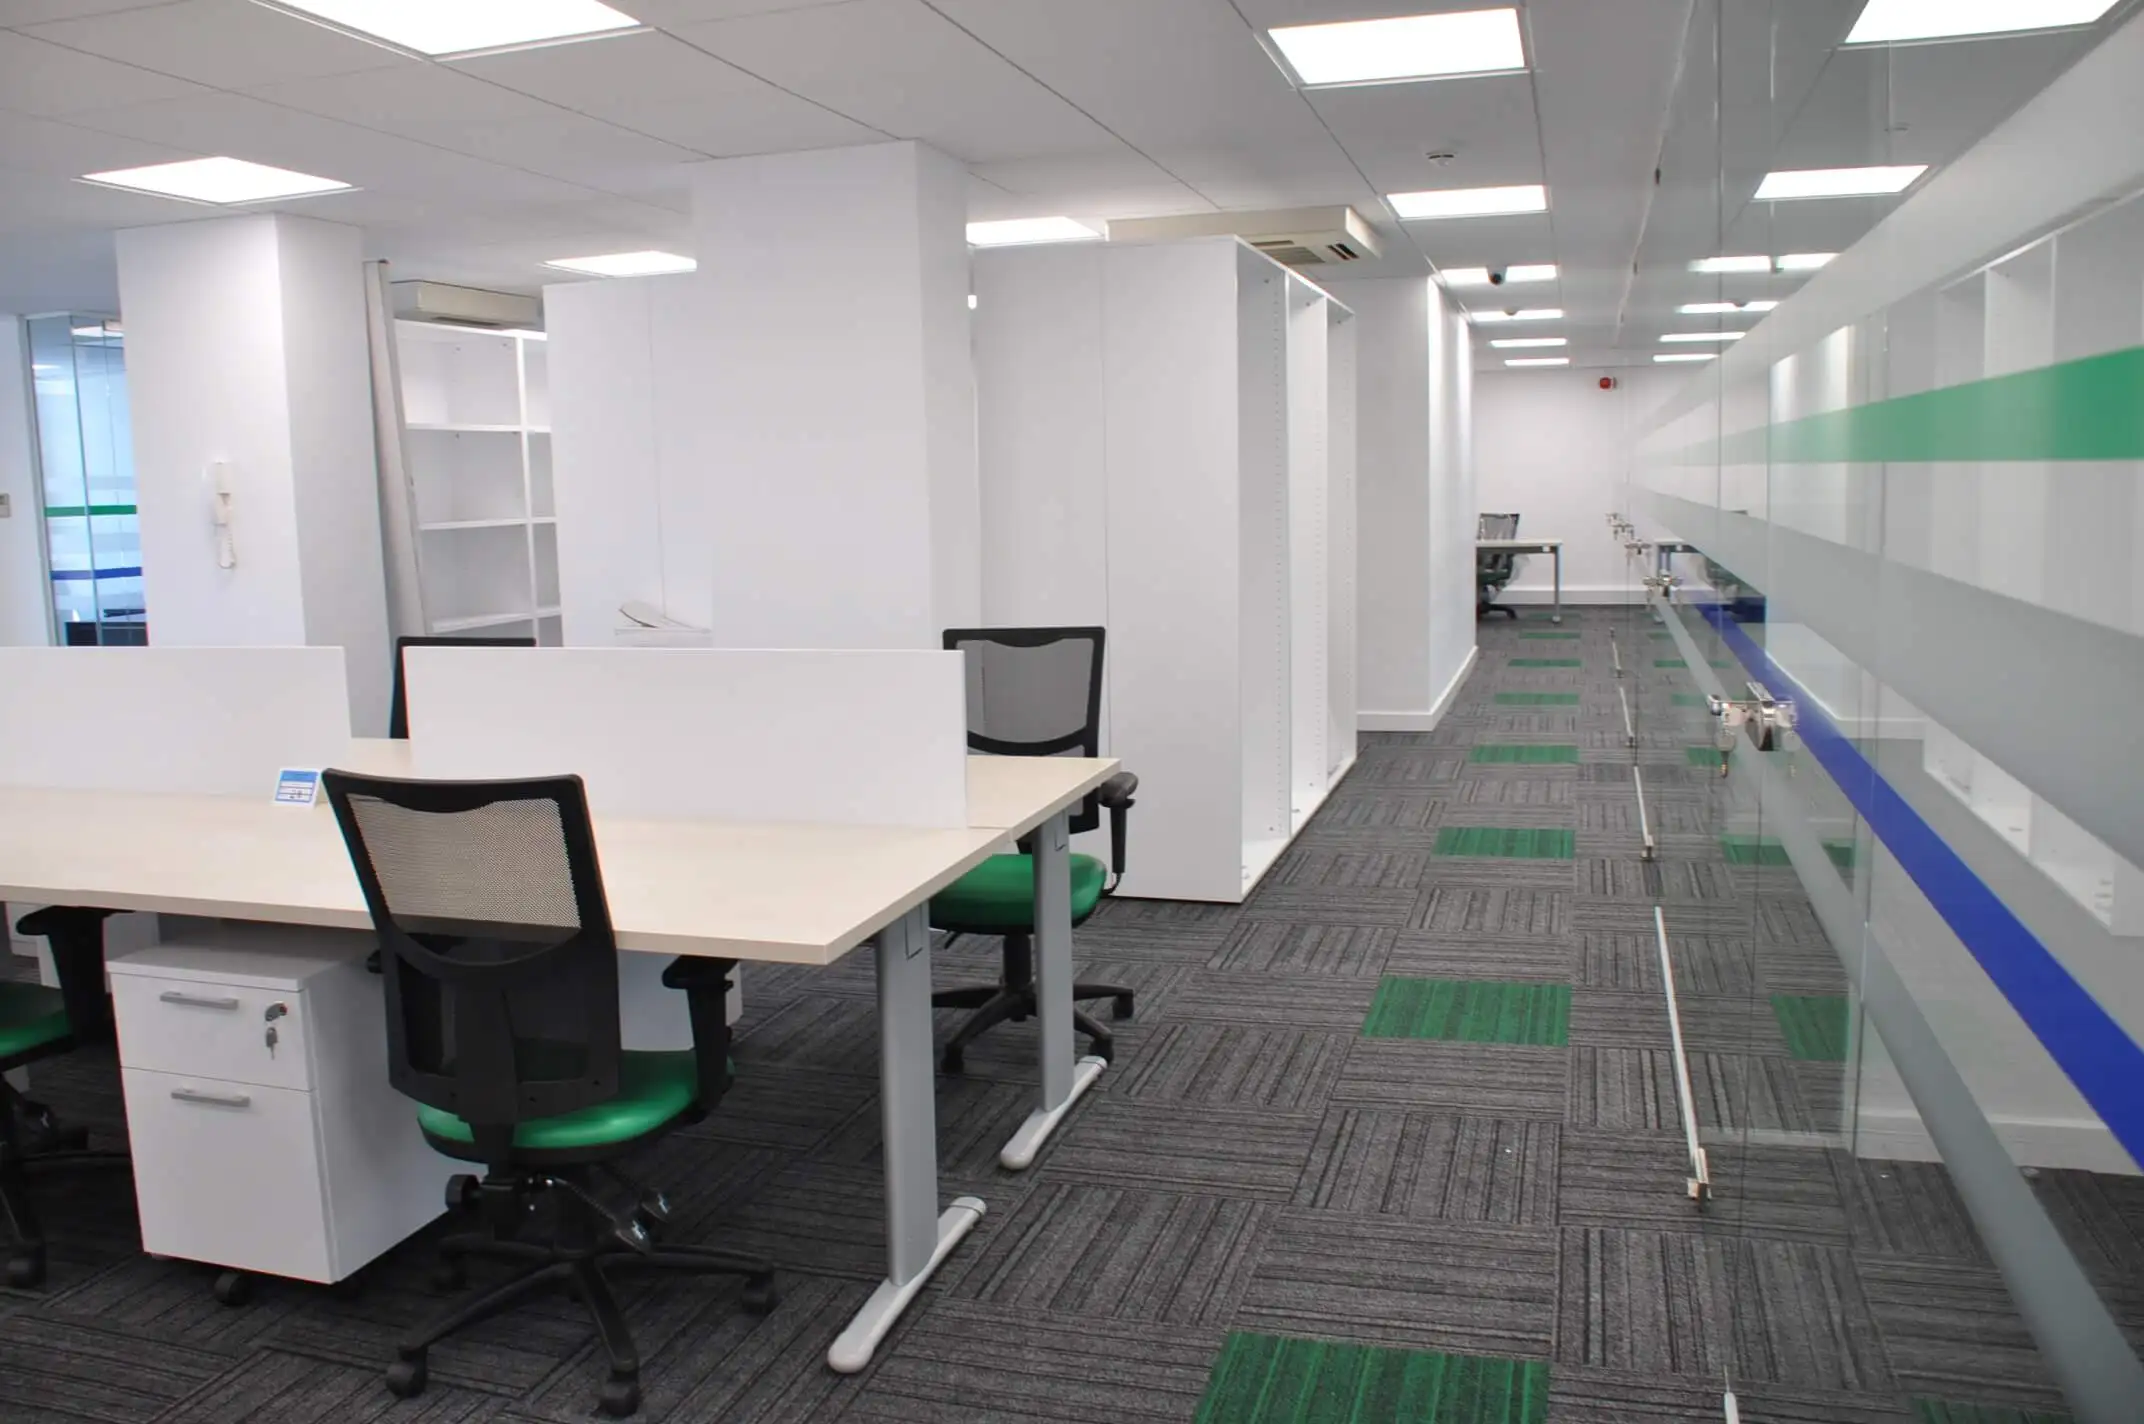 Office with back to back desks chairs pedestals and glass partition